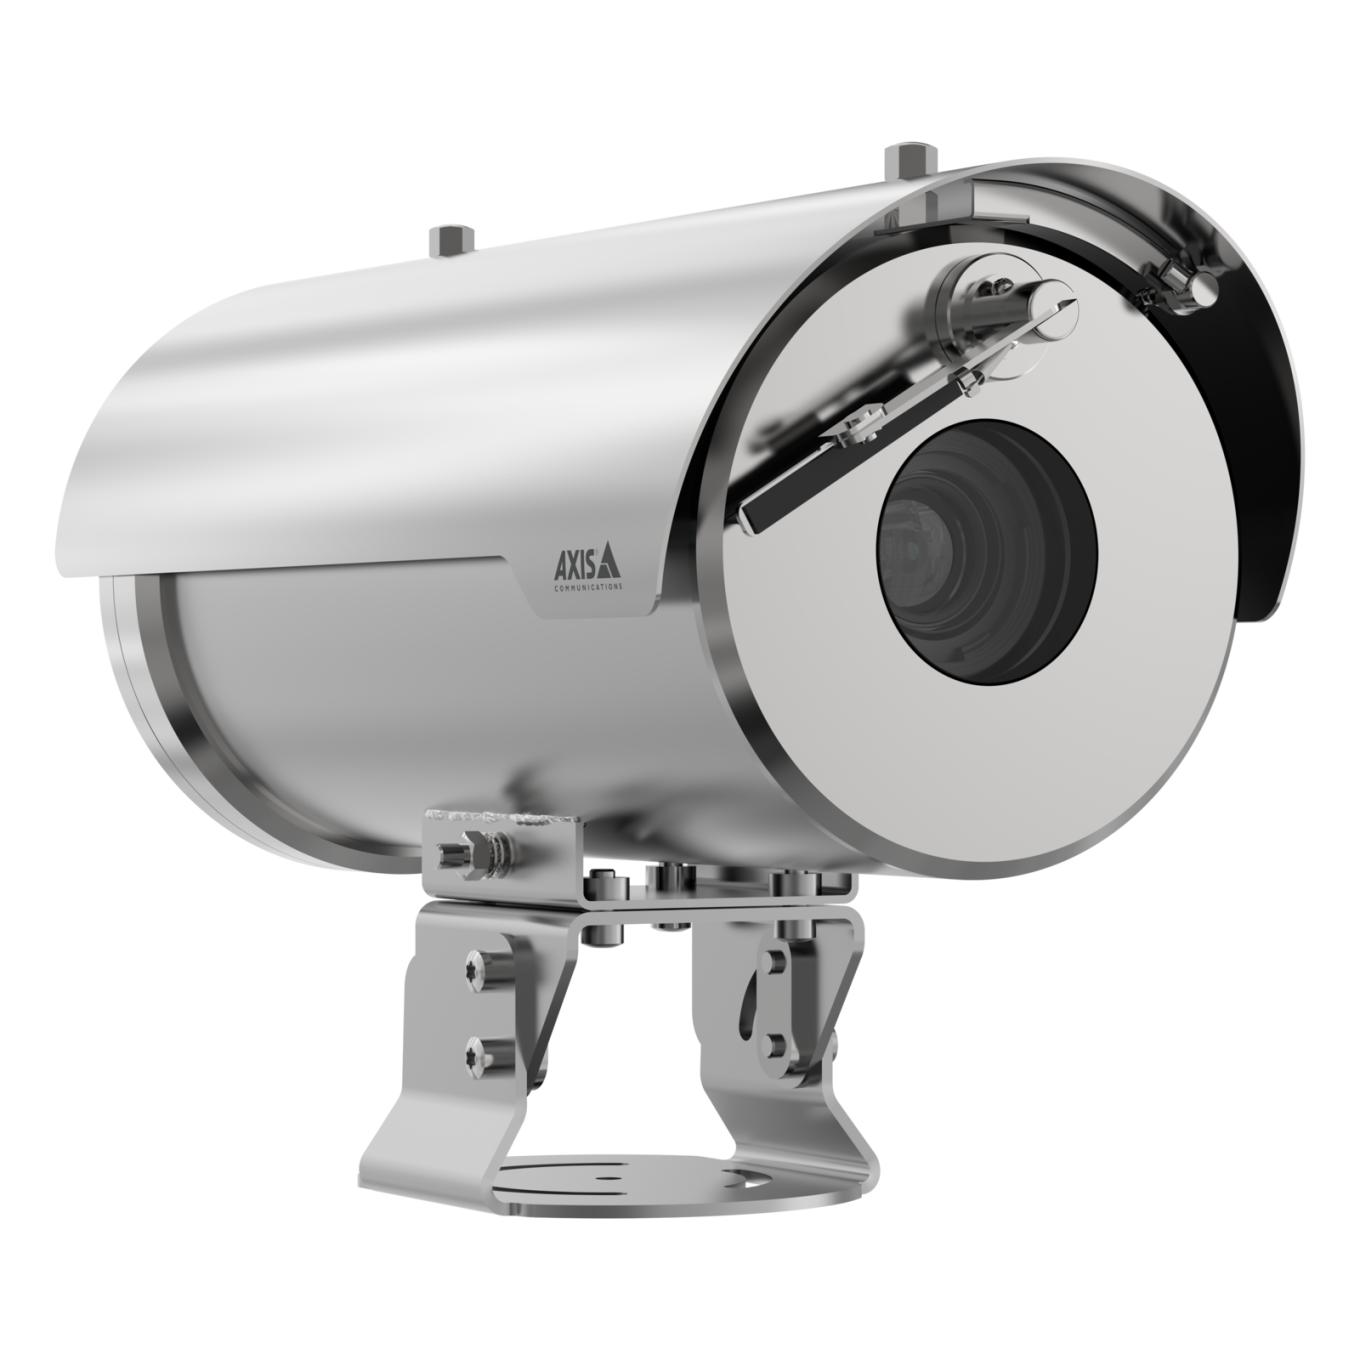 Silver colored camera AXIS XFQ1656 viewed from its right angle.